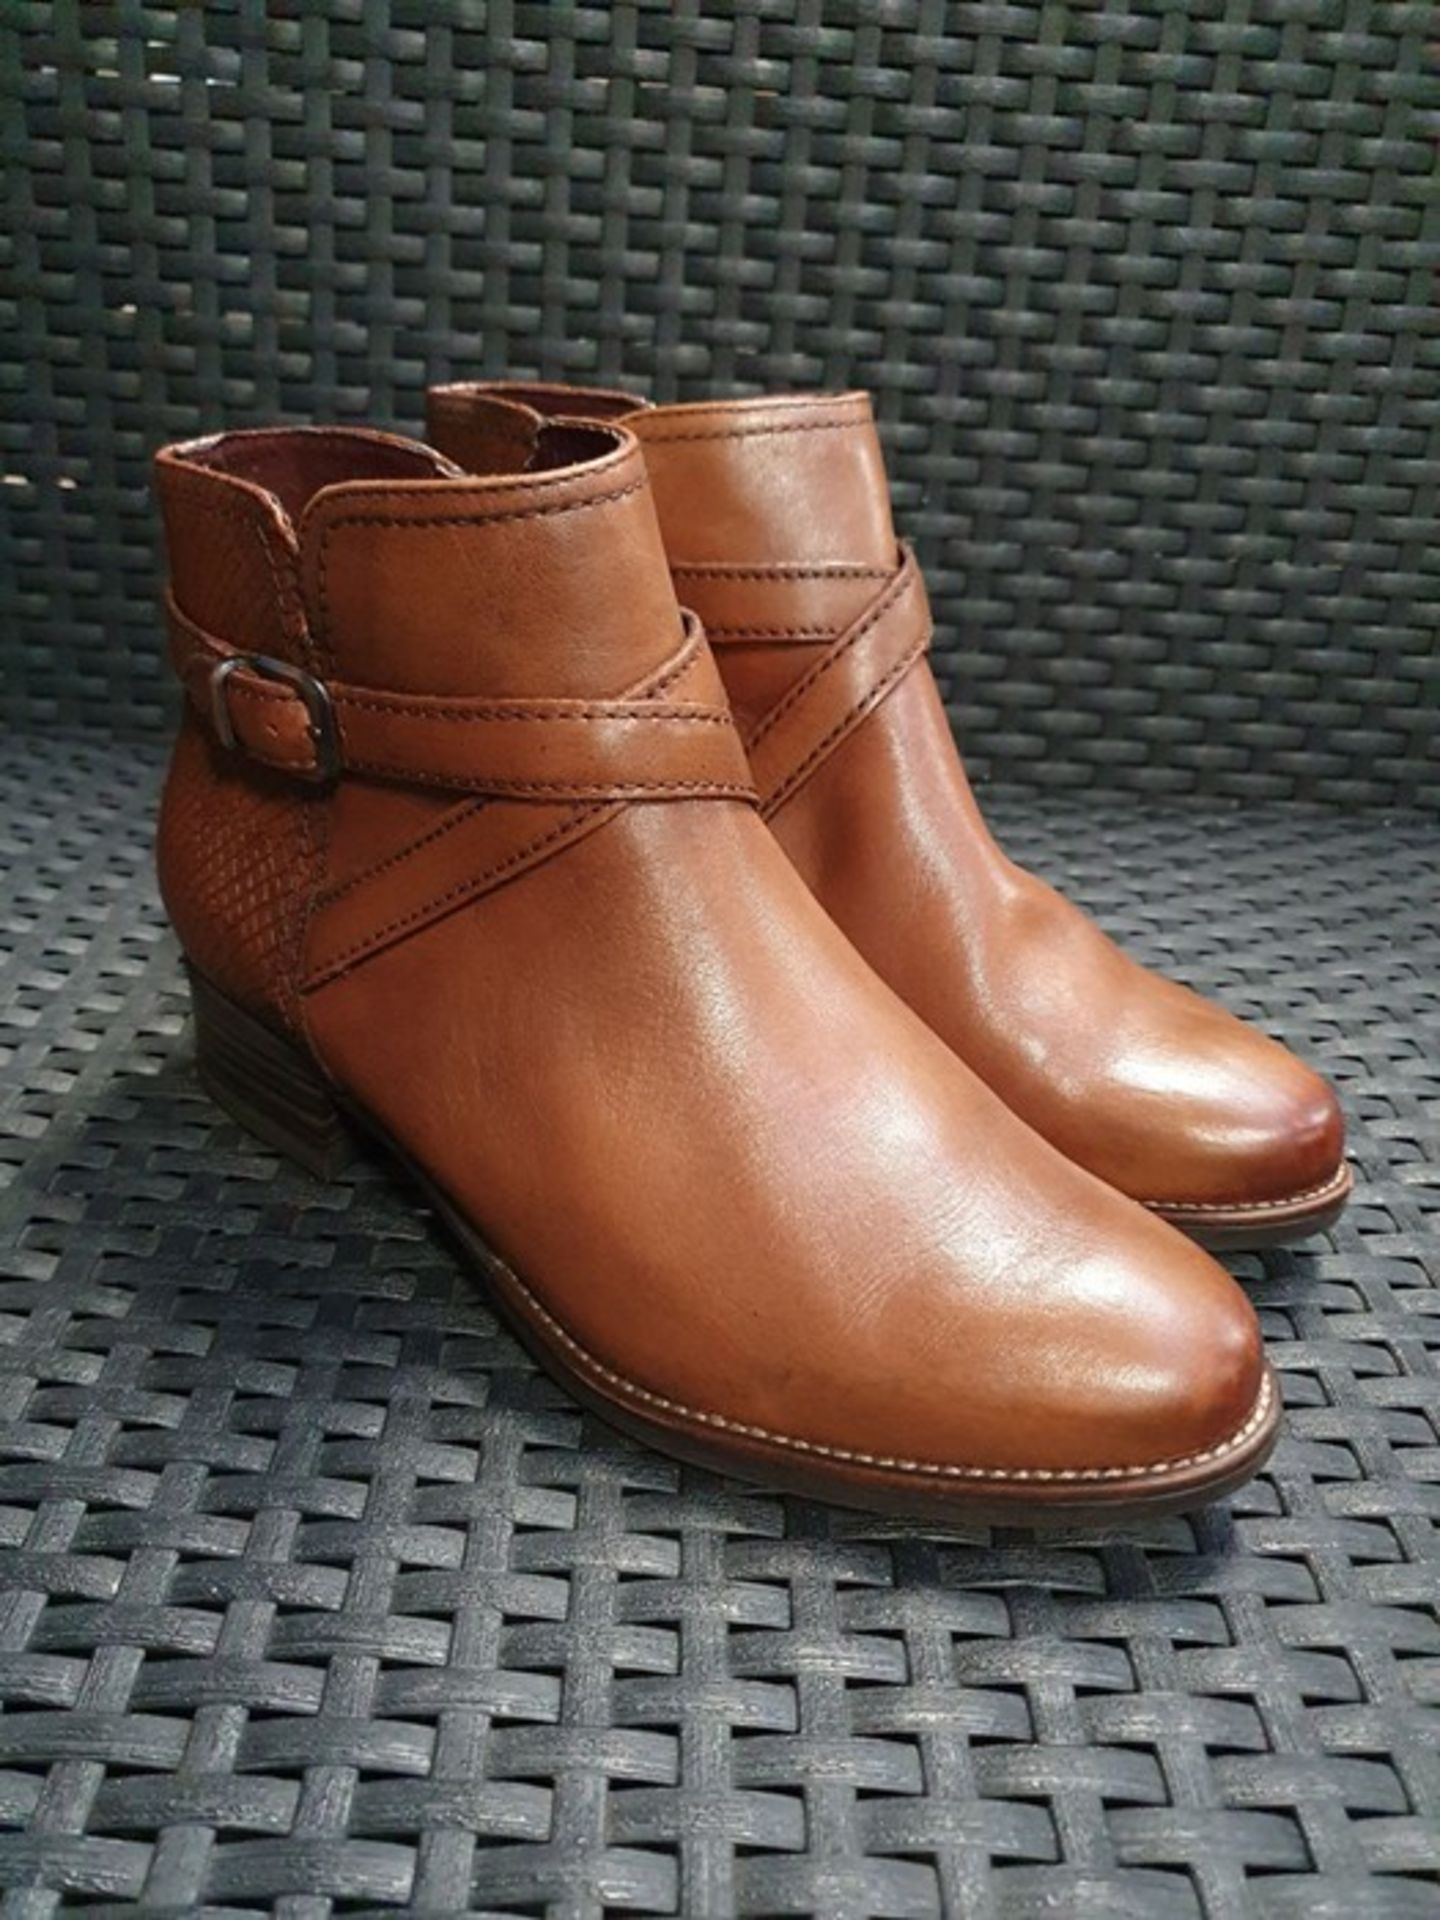 ONE PAIR OF TAMARIS LOTE LEATHER BOOTS IN BROWN - SIZE EU 37. RRP £80.00 GRADE A* - AS NEW WITH